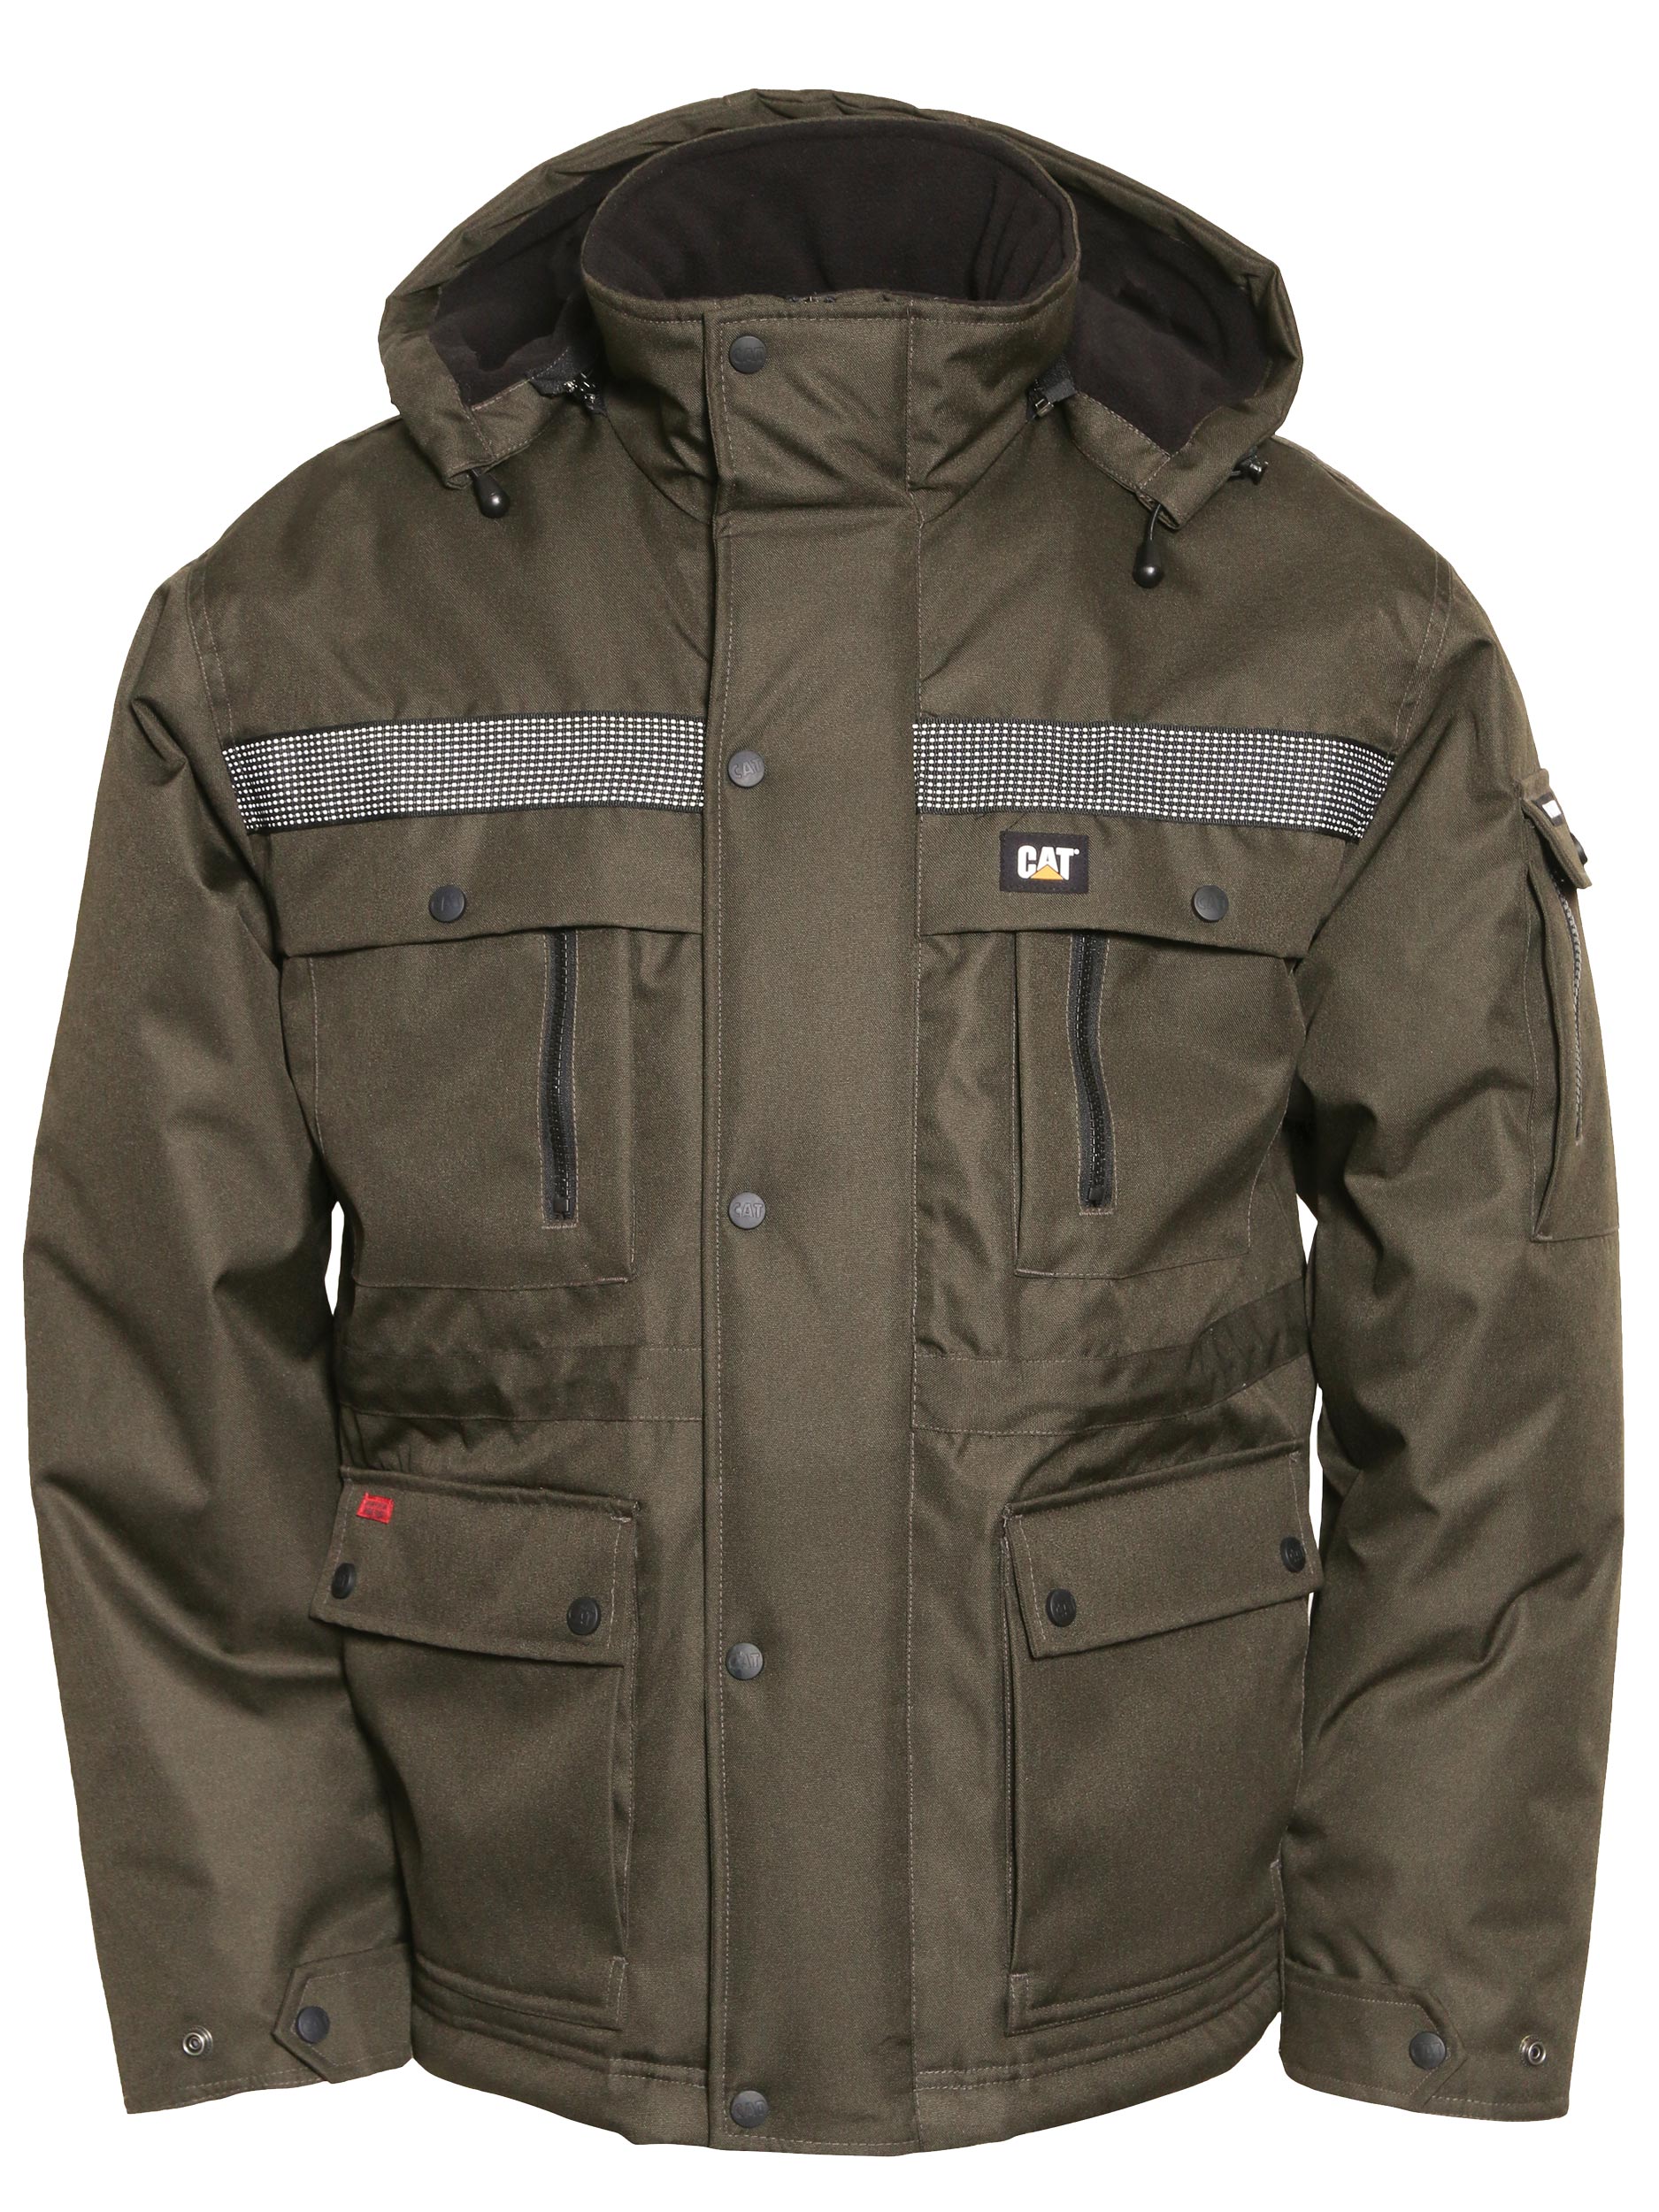 Caterpillar Men's Big and Tall Heavy Insulated Parka (Regular and Big &  Tall Sizes)